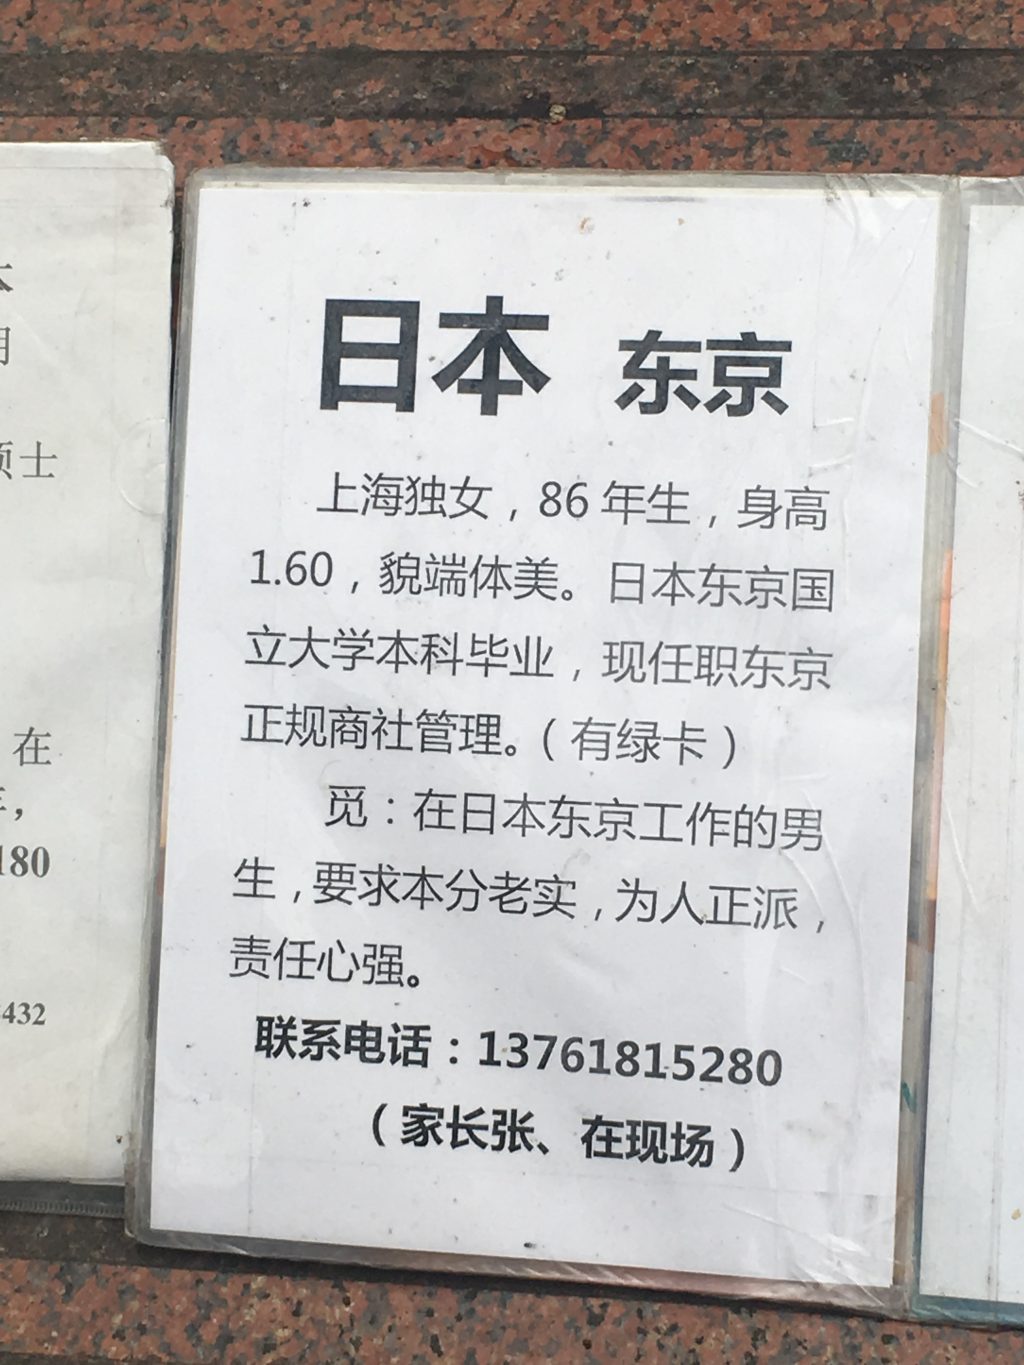 Description of young Chinese man at Shanghai marriage market.